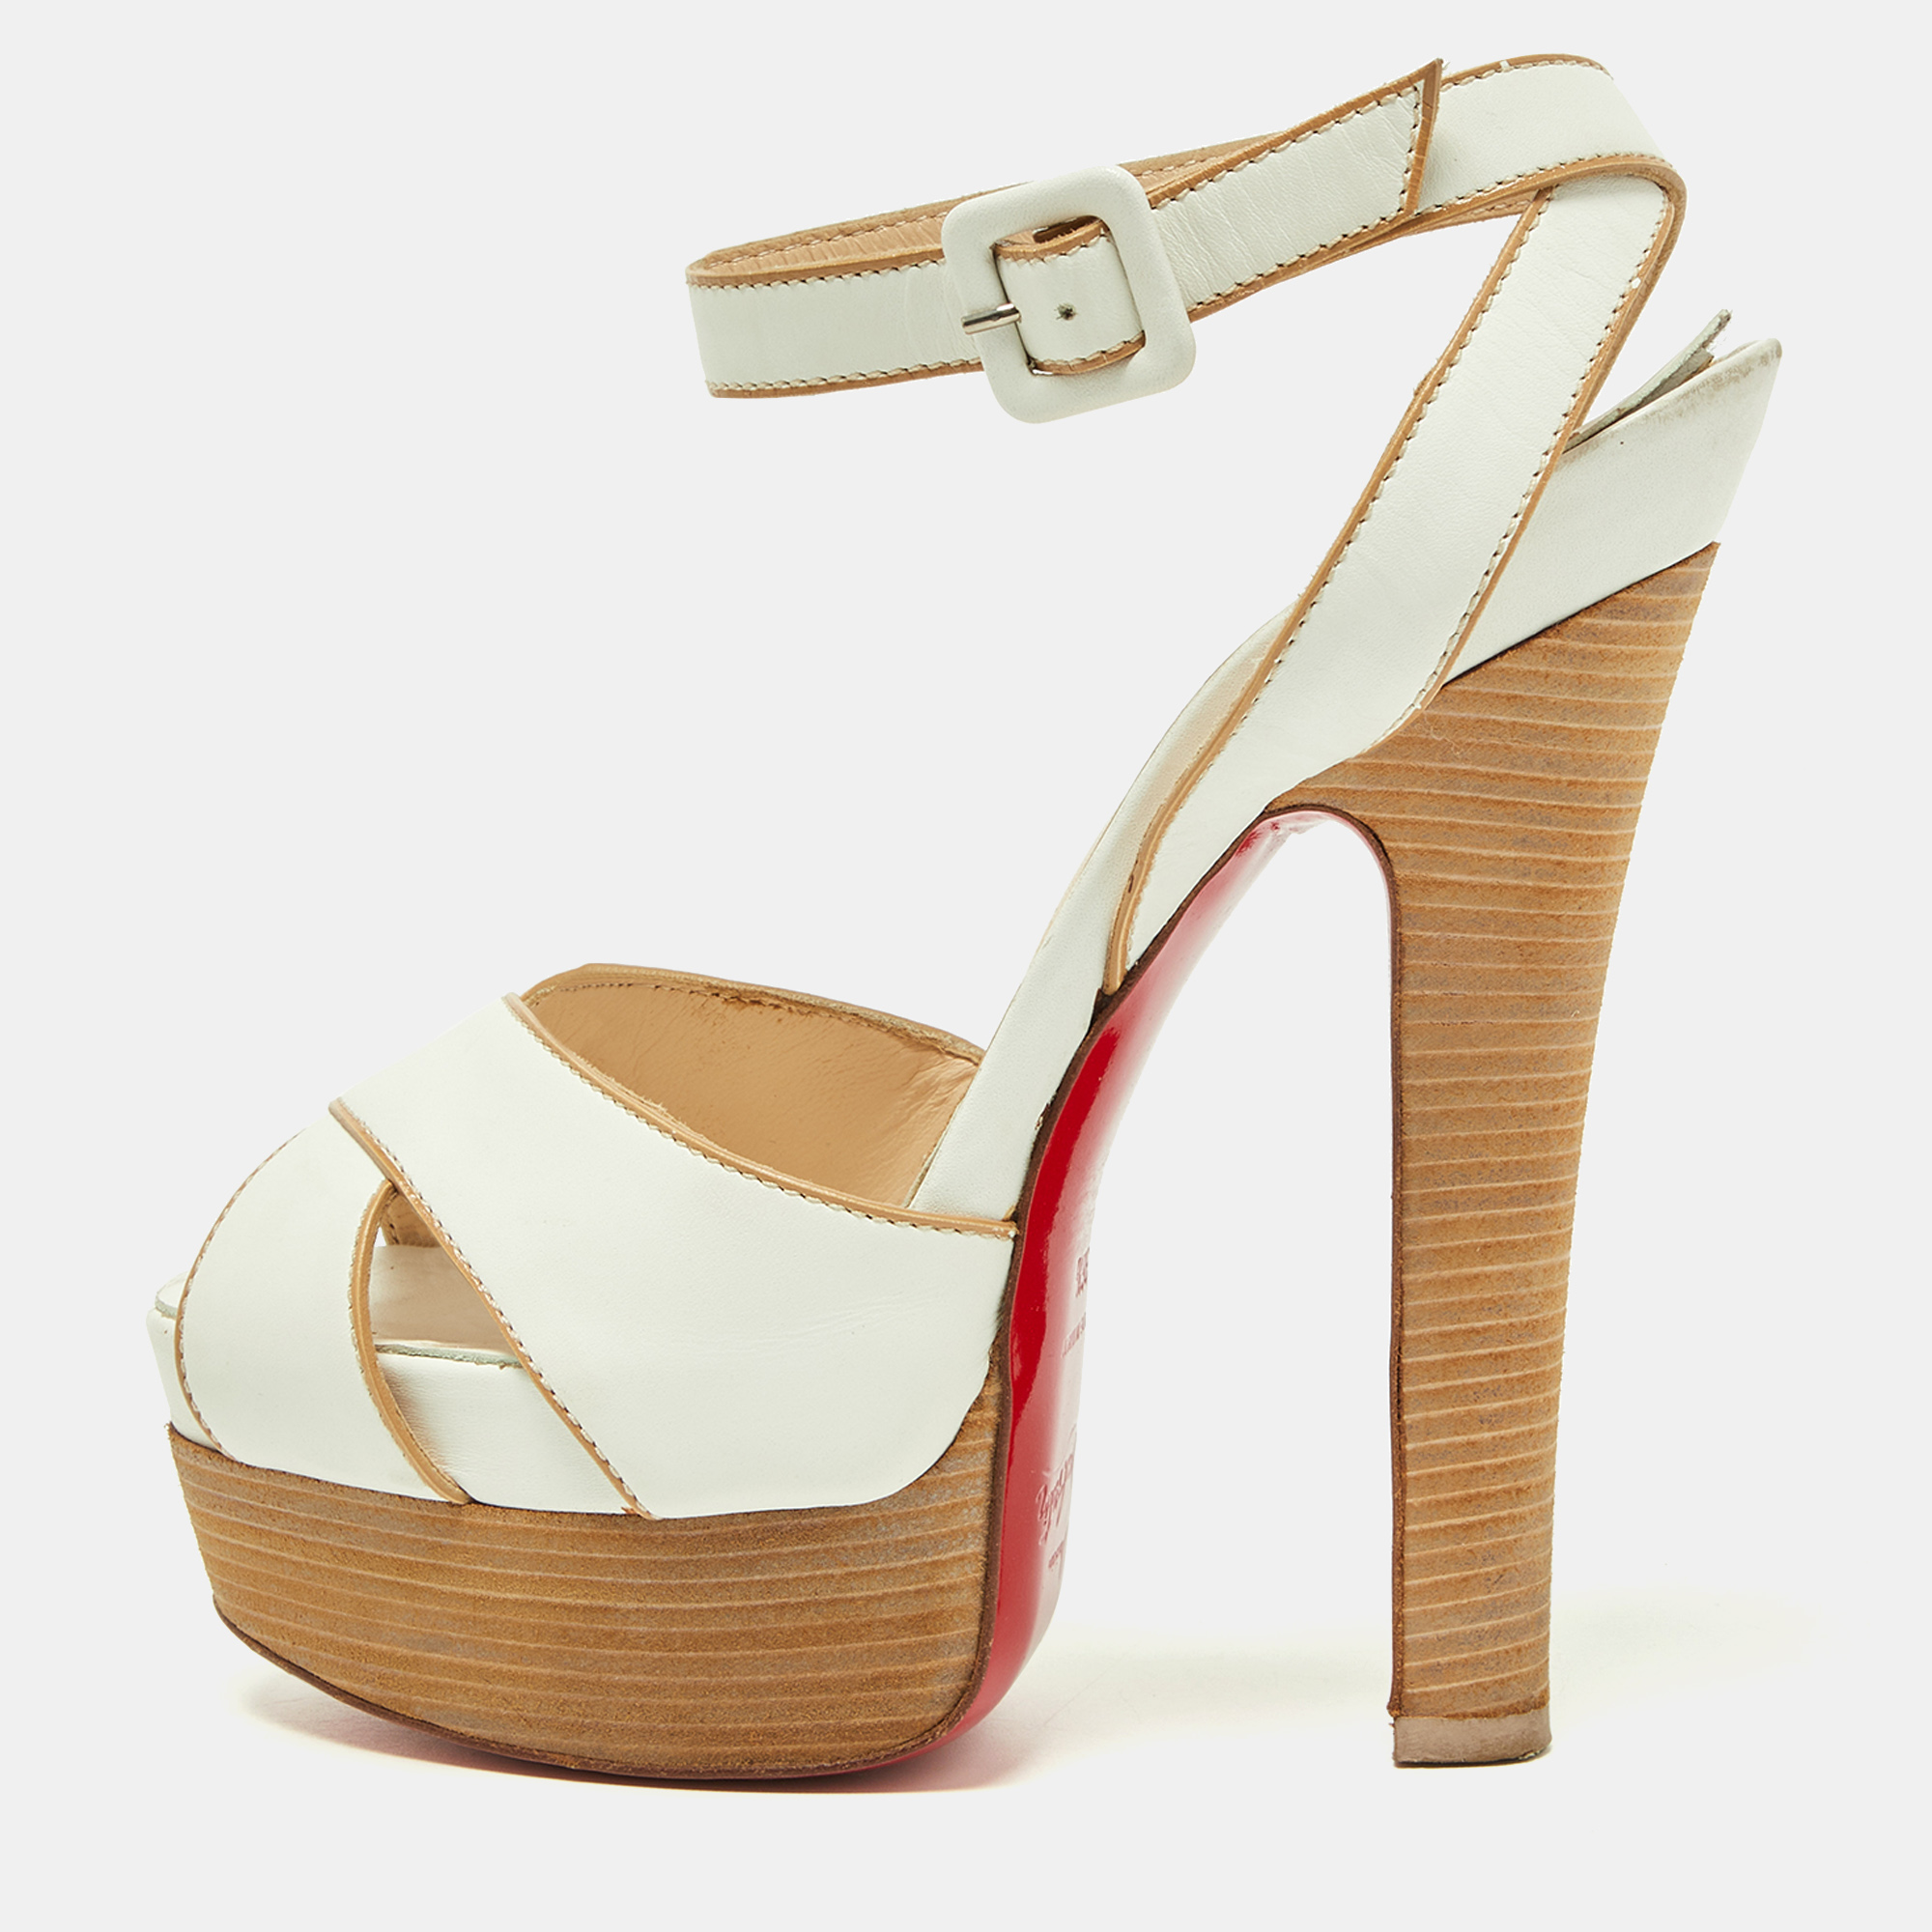 Pre-owned Christian Louboutin White Leather Criss Cross Platform Ankle Strap Sandals Size 36.5